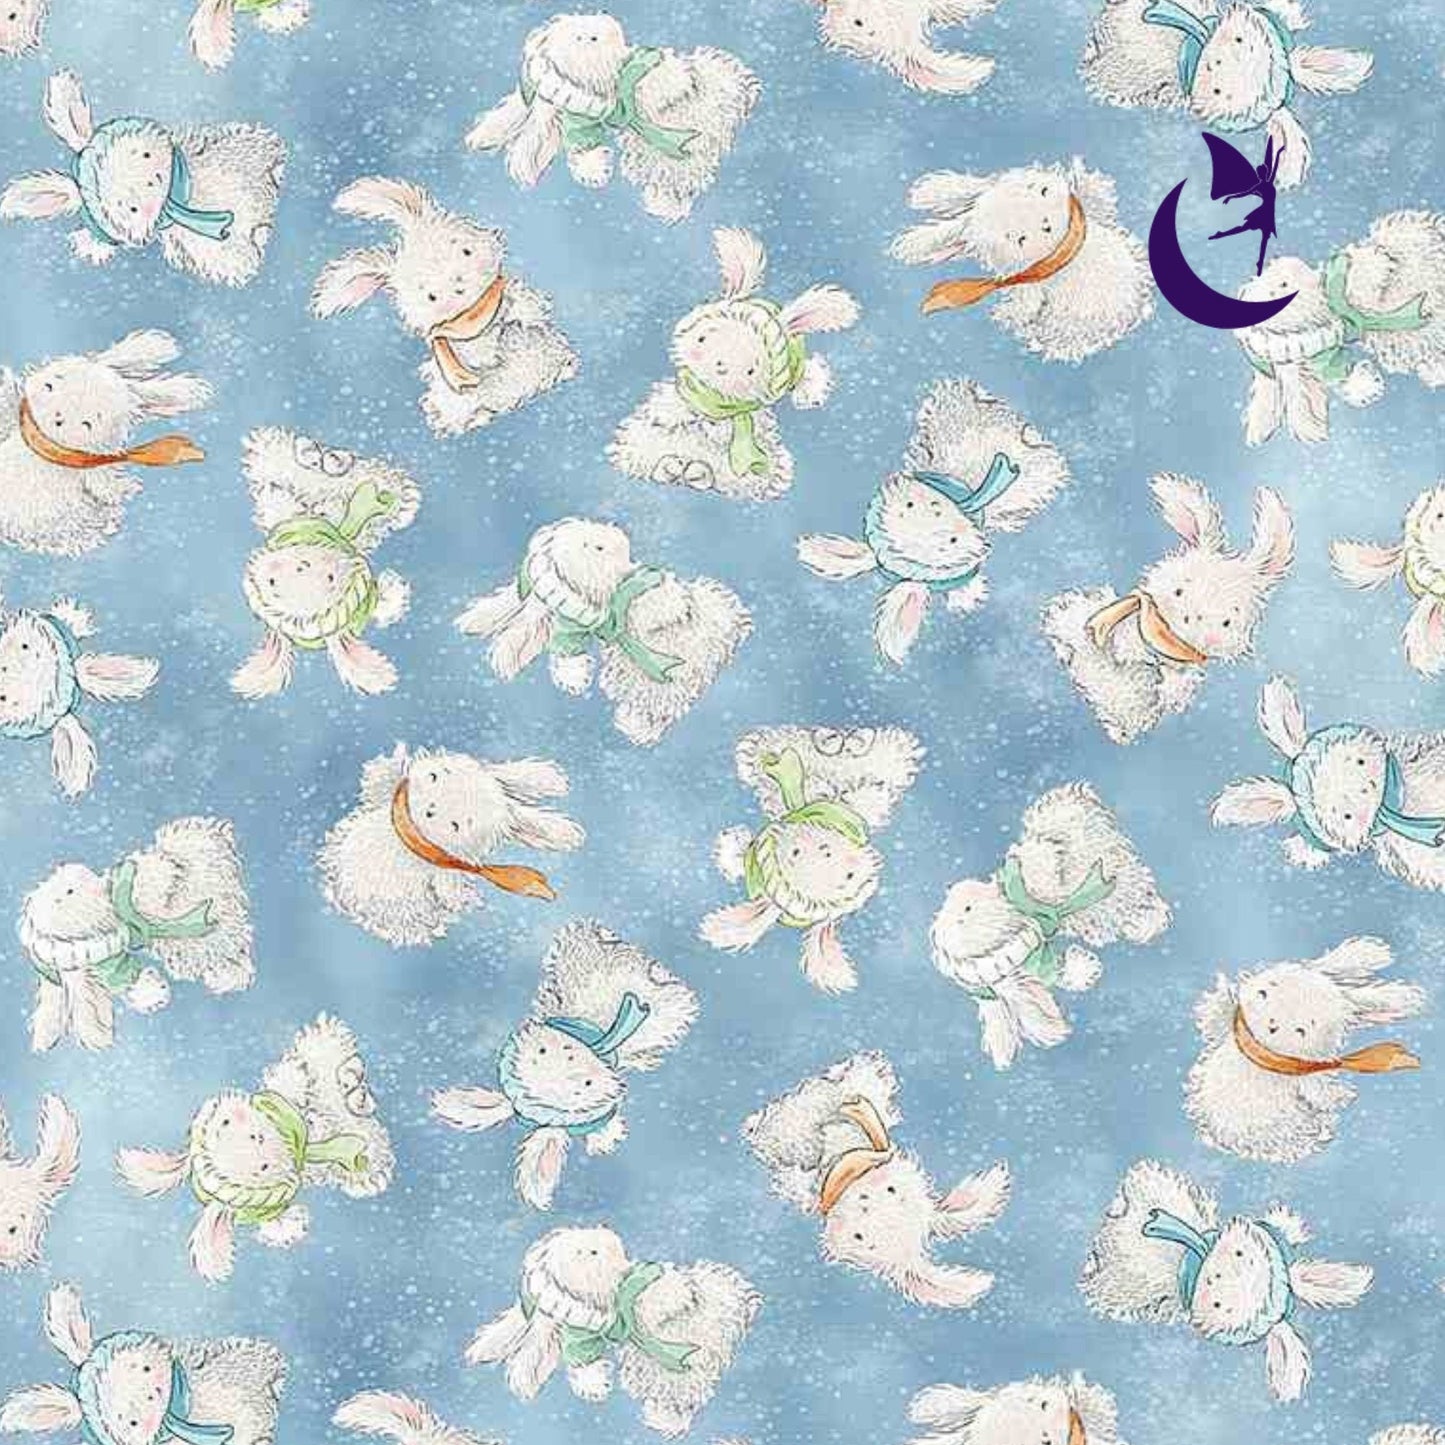 Angels Neverland fabric Arctic Night Sky Arctic Nights Boreal Buddies Aurora Borealis Fabric from Bunnies By the Bay